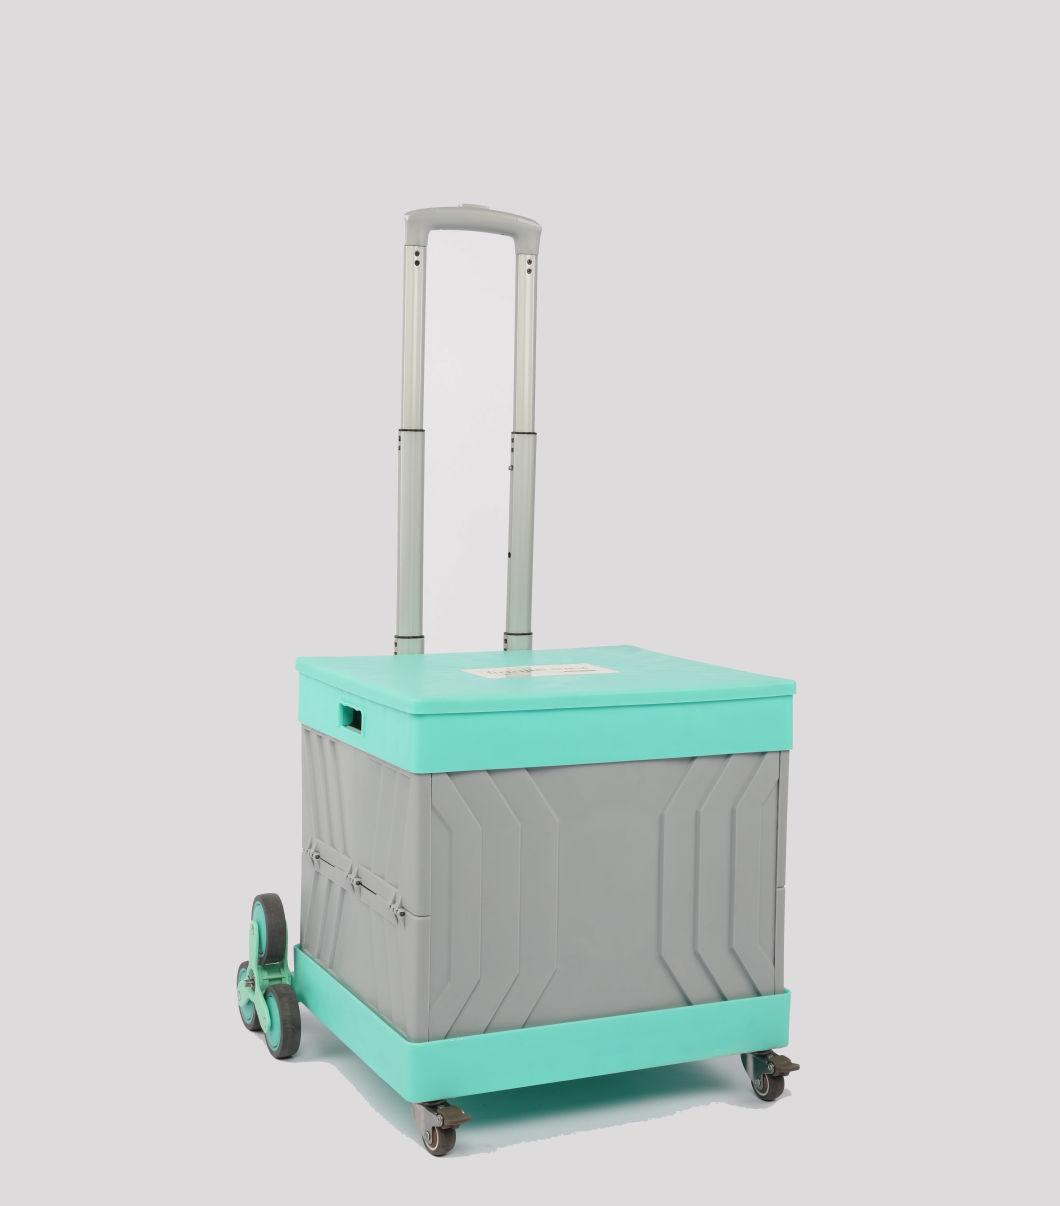 China Factory Rolling Folding Shopping Plastic Crate Trolley Cart with Seat